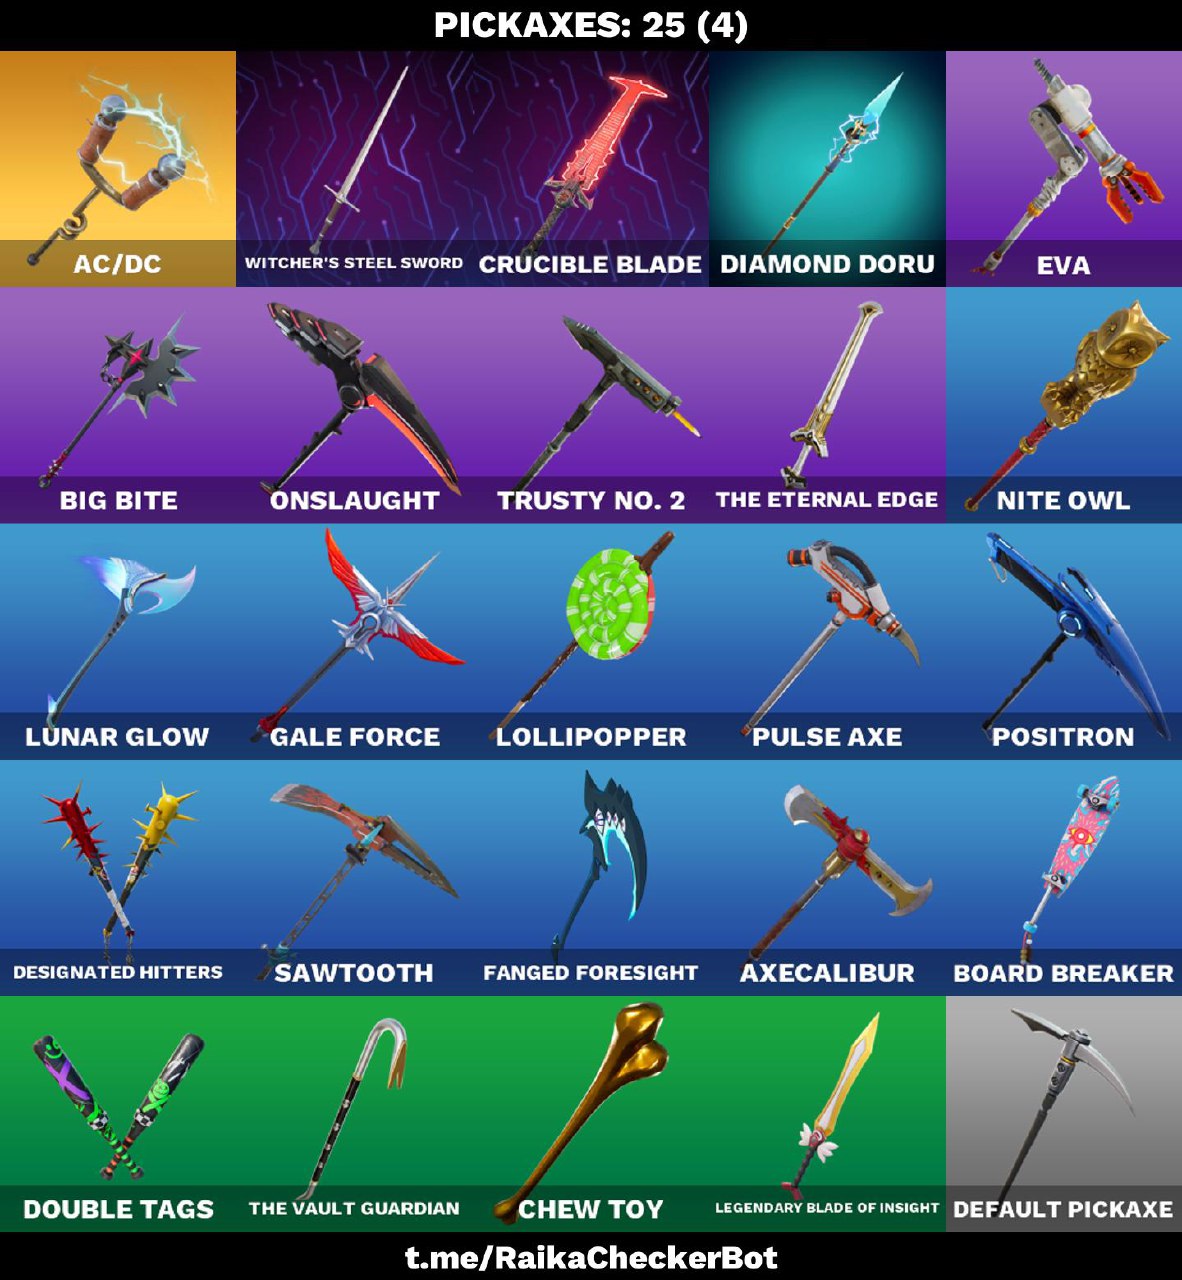 PC/PSN/XBOX fa 36 skins Black Knight | Sparkle Specialist | Royale Knight | Blue Squire | Floss | Fresh | OG STW DELUXE | 1050 VBUCKS